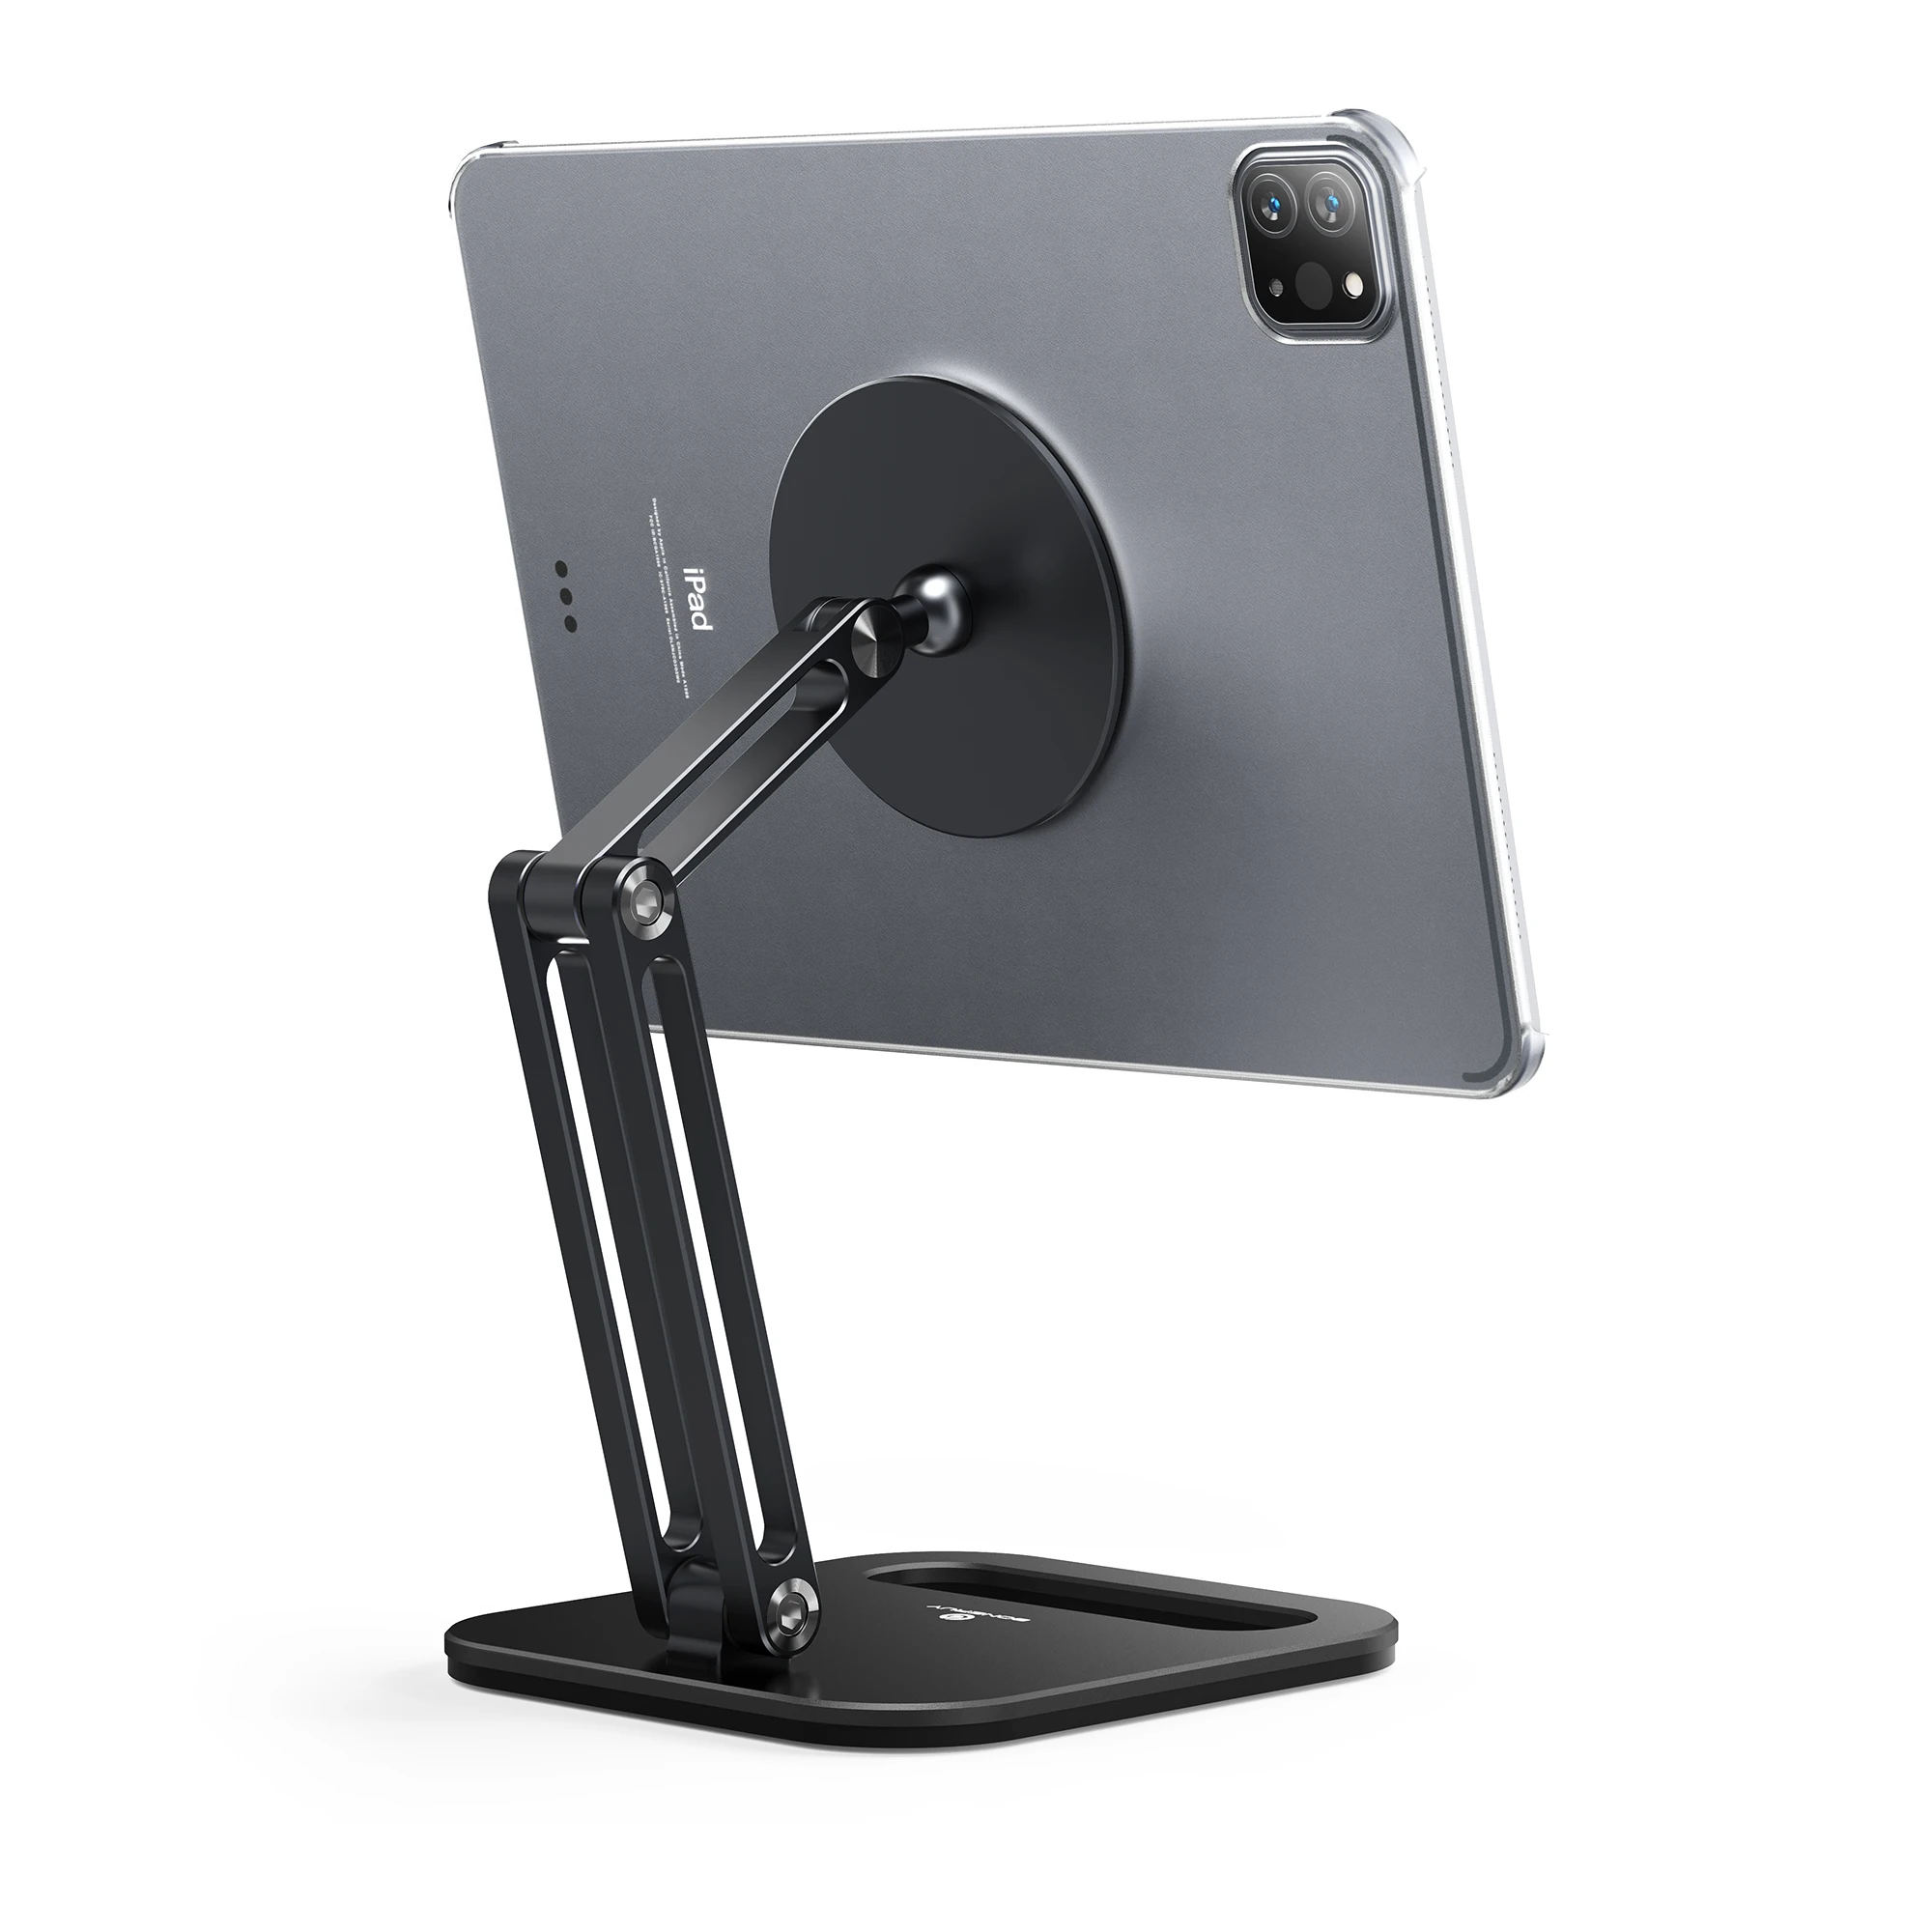 

Boneruy Ergonomic Tablet Stand Aluminum Rotate Folding Magnetic Tablet Holder Tablet PC Stand for iPad